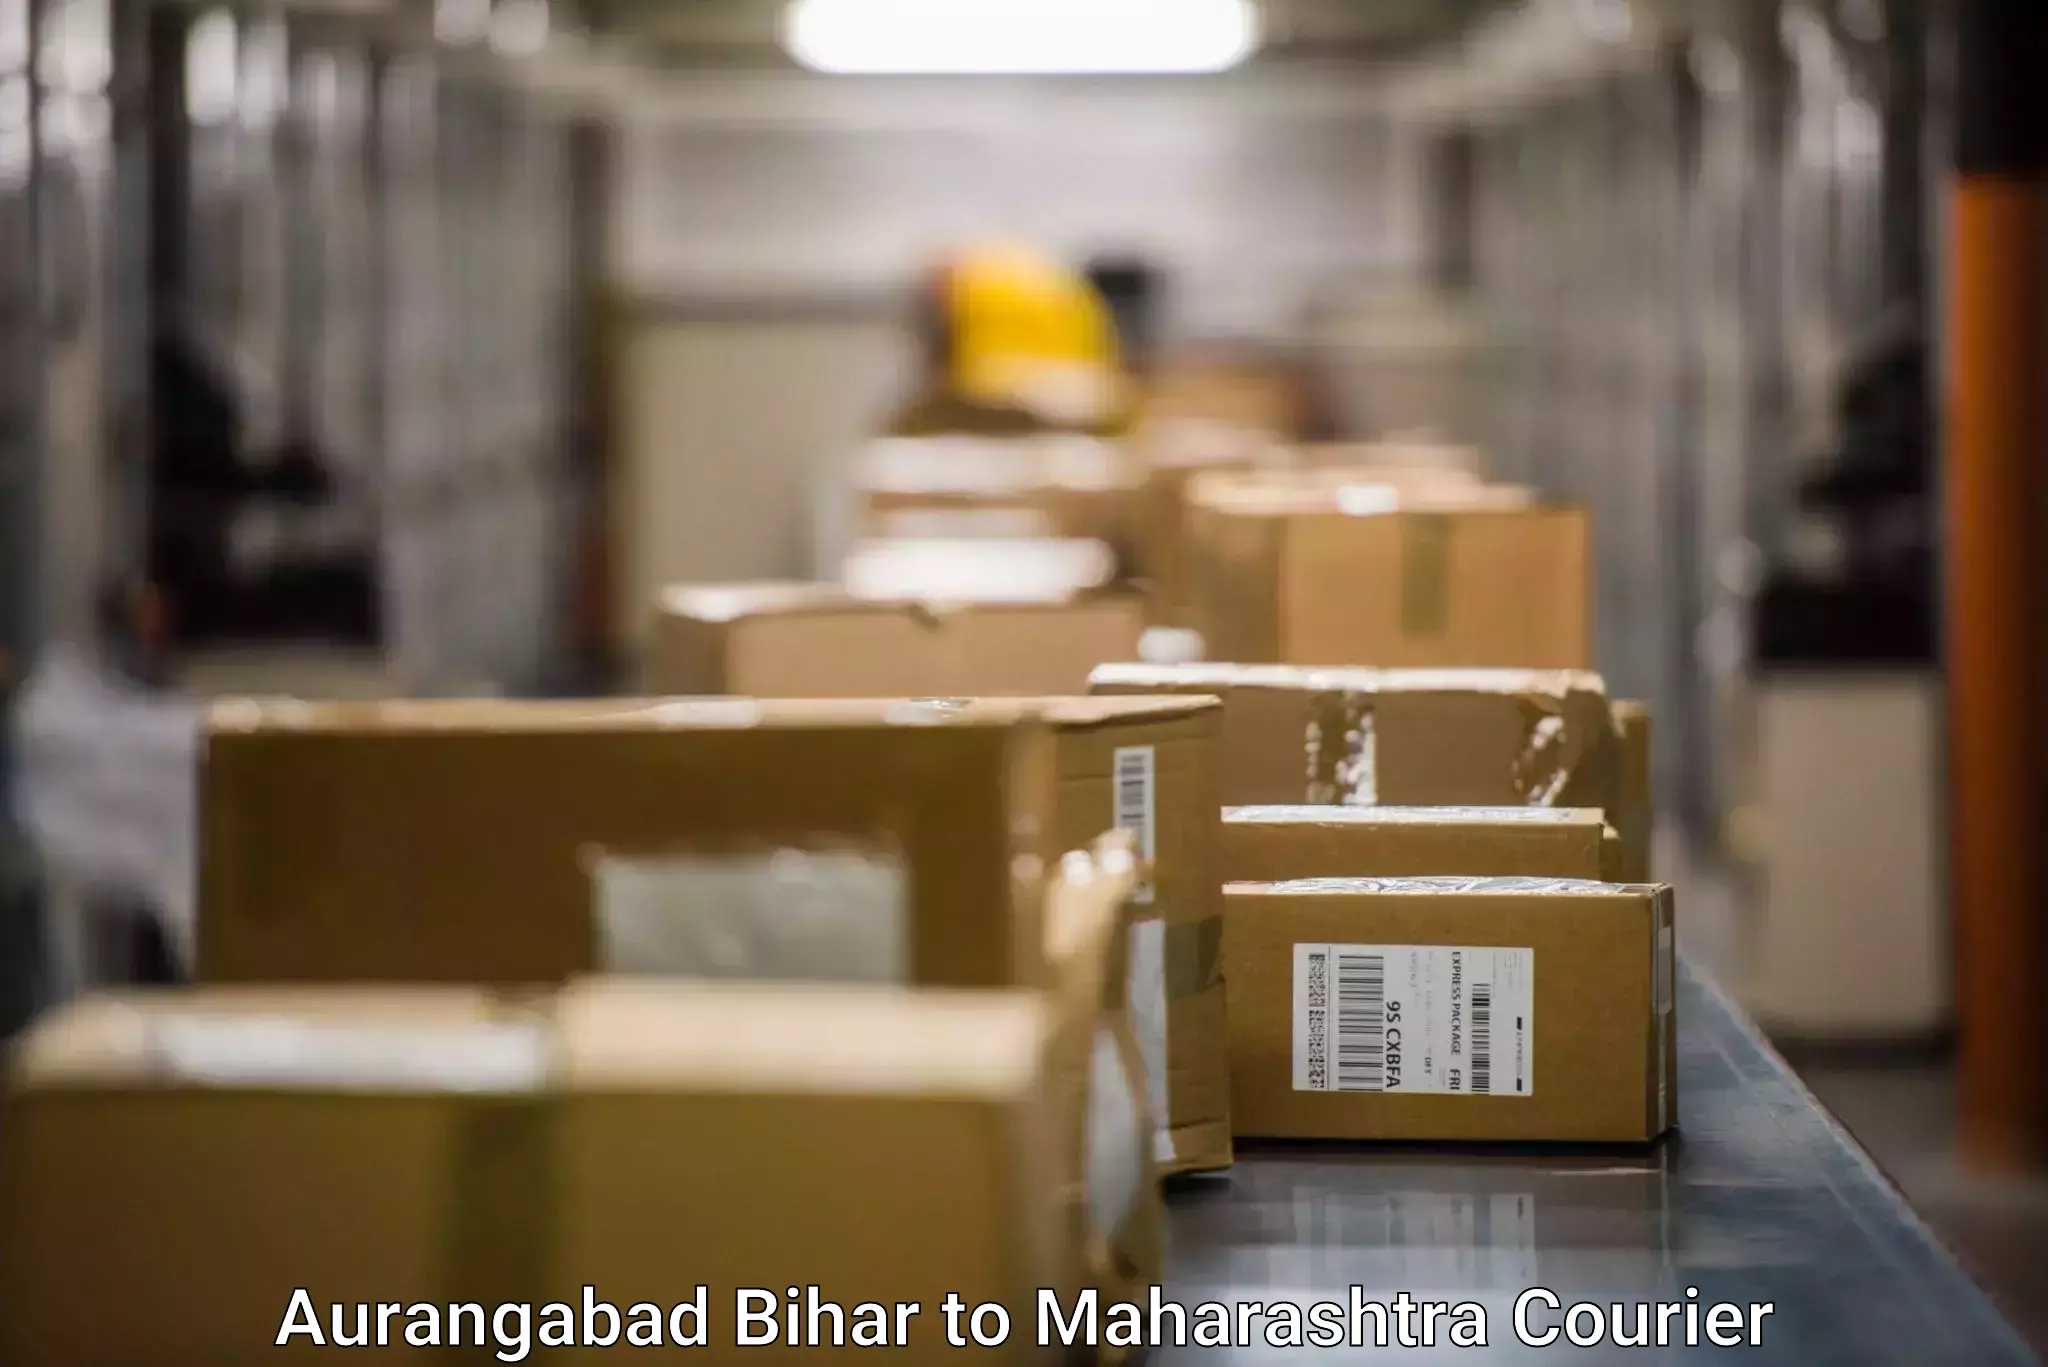 Easy access courier services in Aurangabad Bihar to Parli